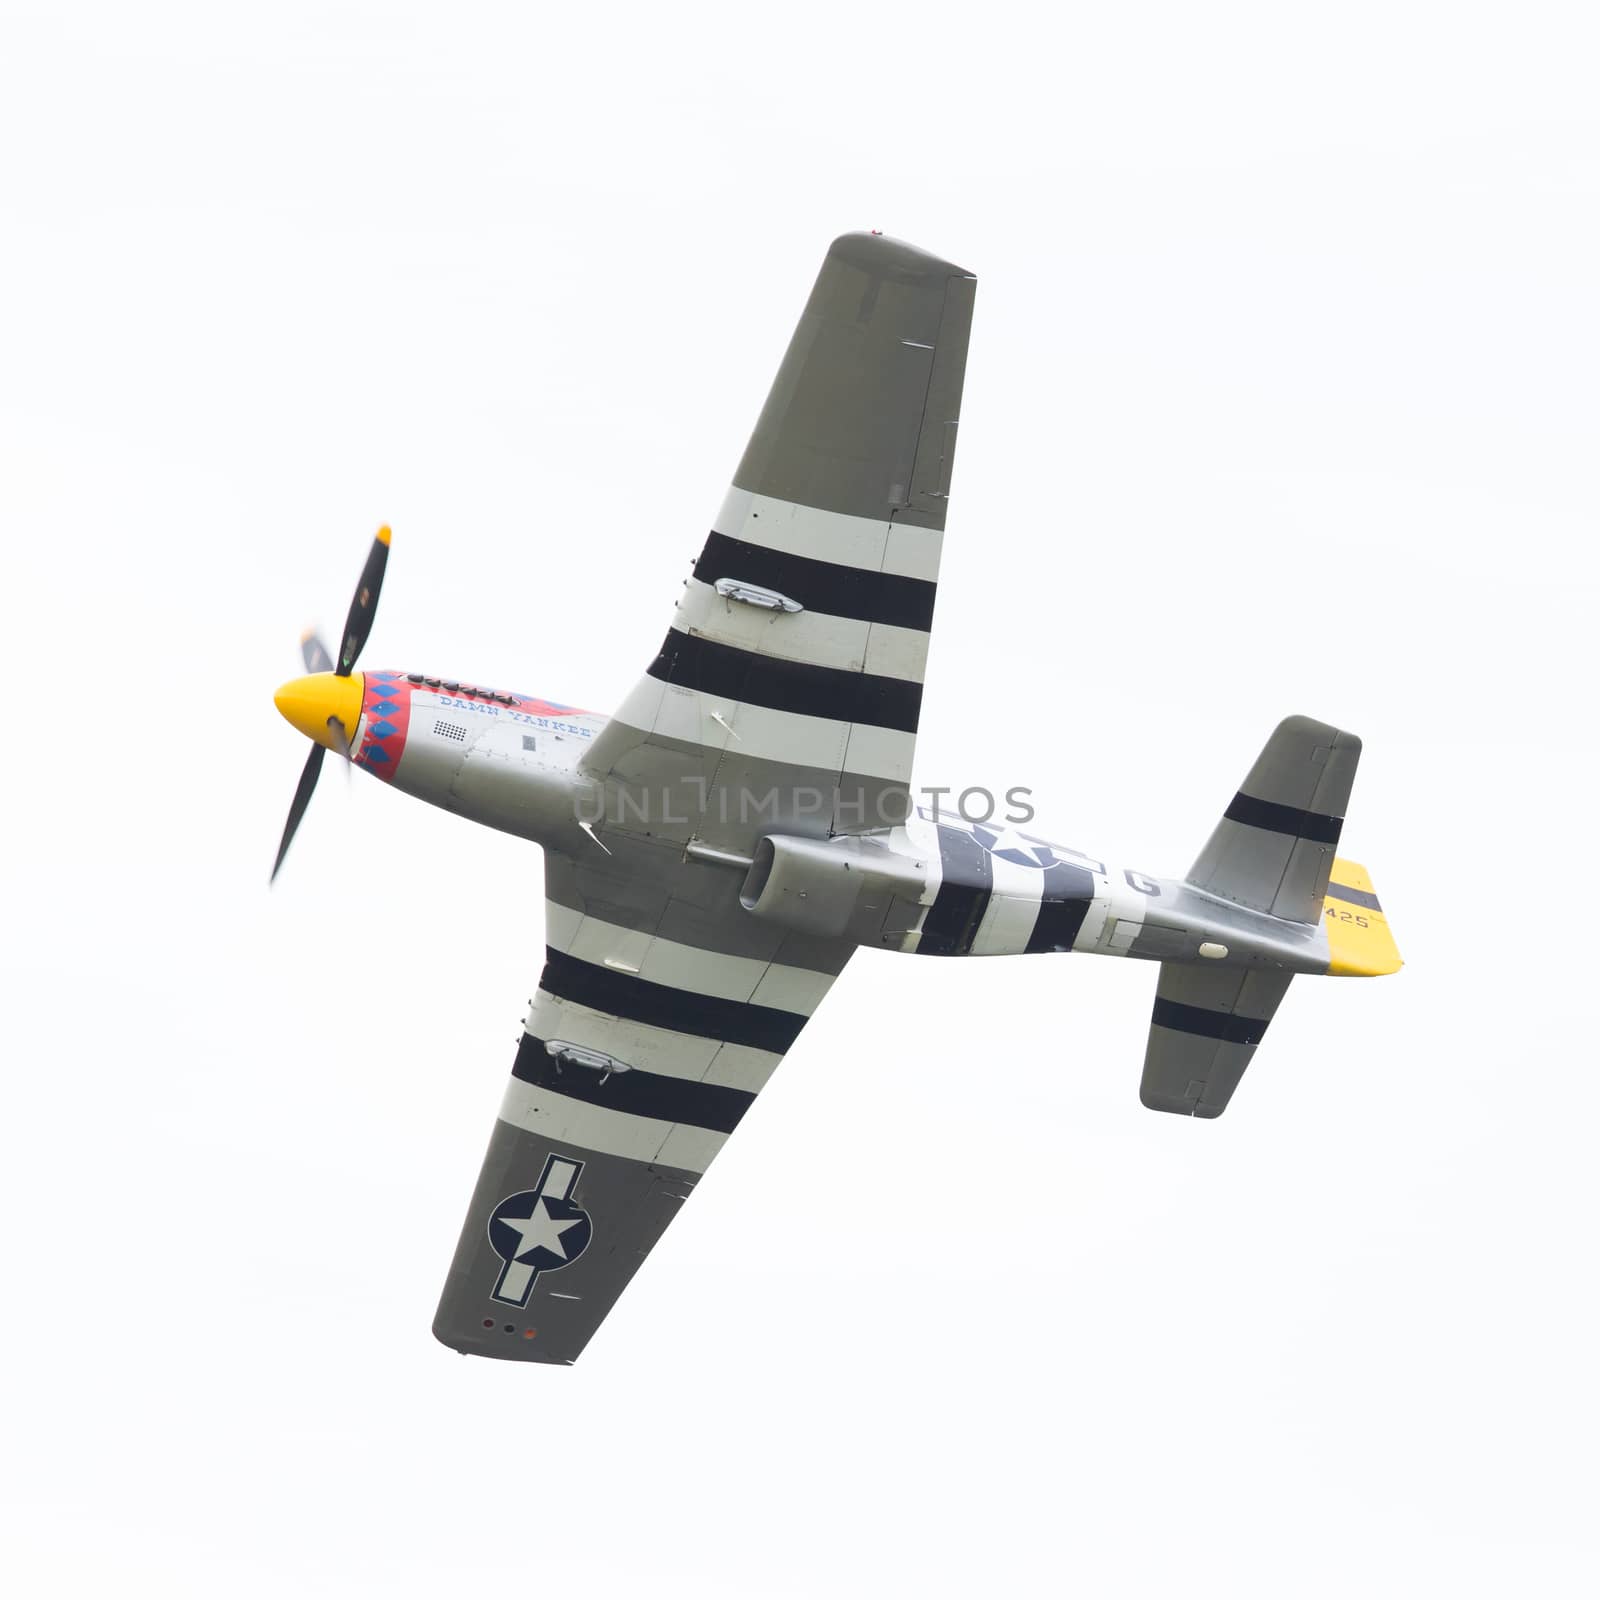 LEEUWARDEN, THE NETHERLANDS - JUNE 10: P51 Mustang displaying at by michaklootwijk